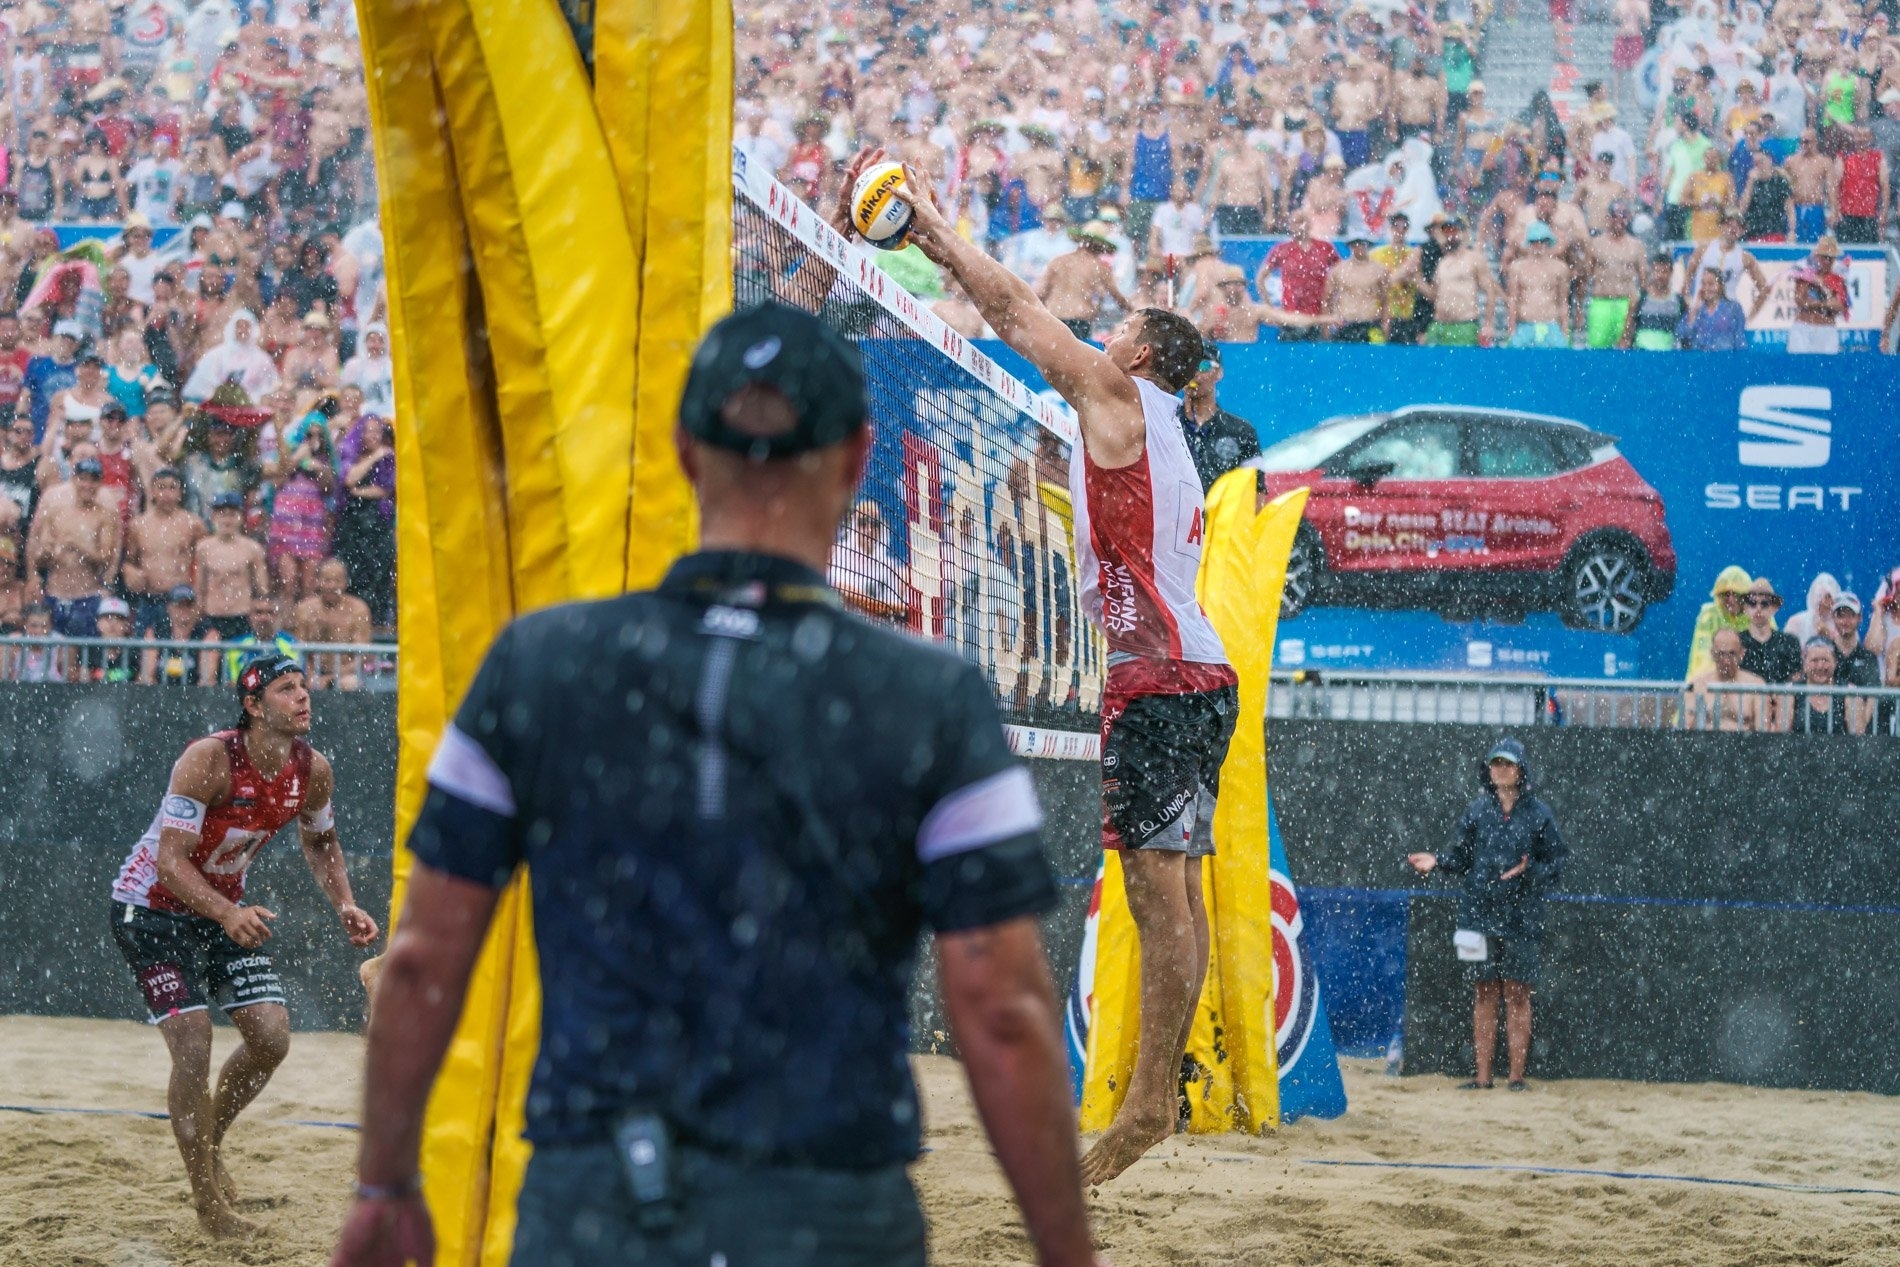 Action from the Red Bull Beach Arena as the rain comes down during the storm